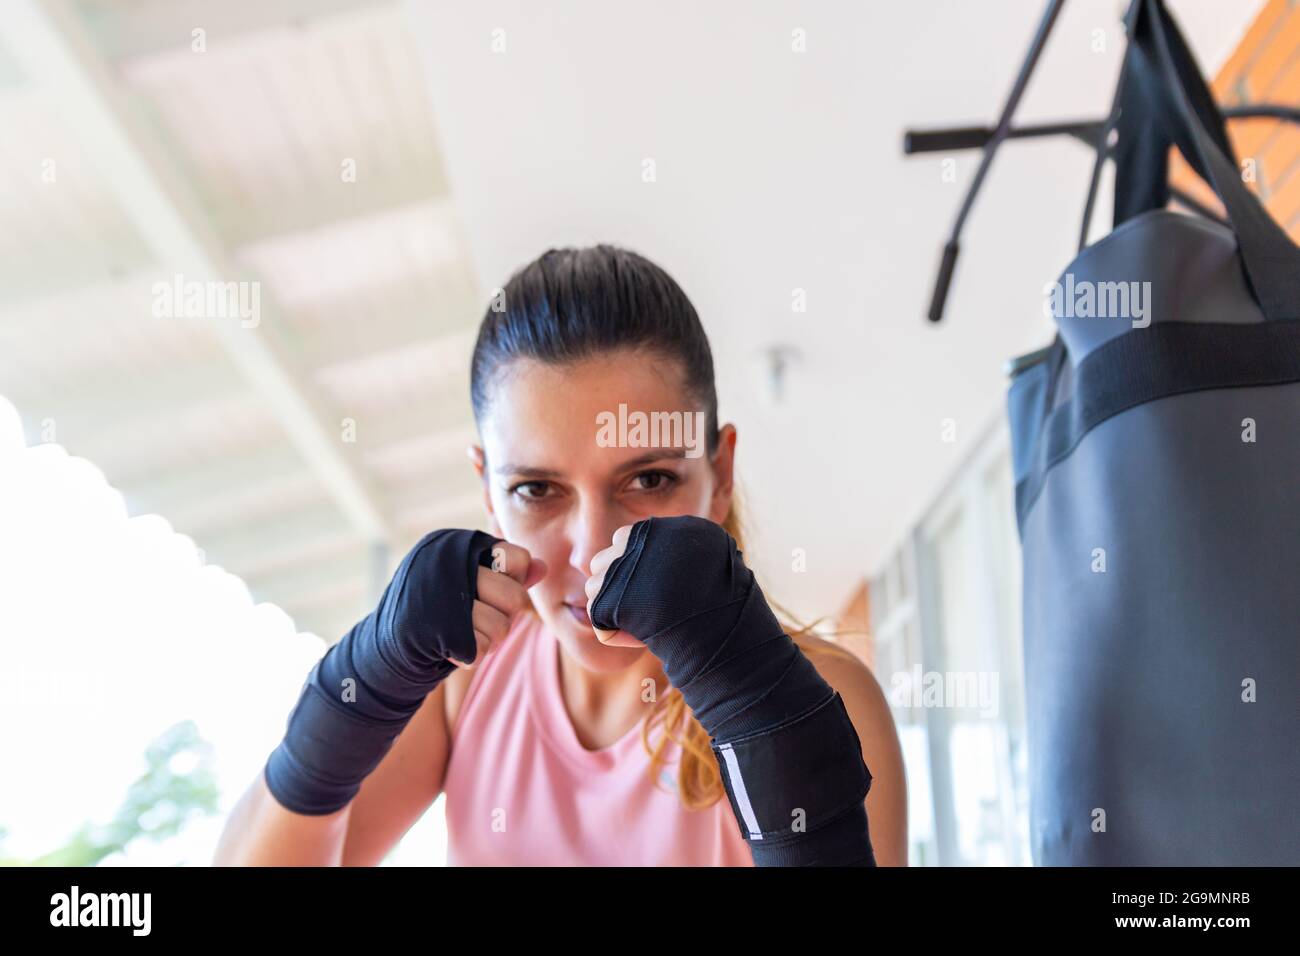 Strong Woman in Combat Pose Looking at Camera Stock Photo